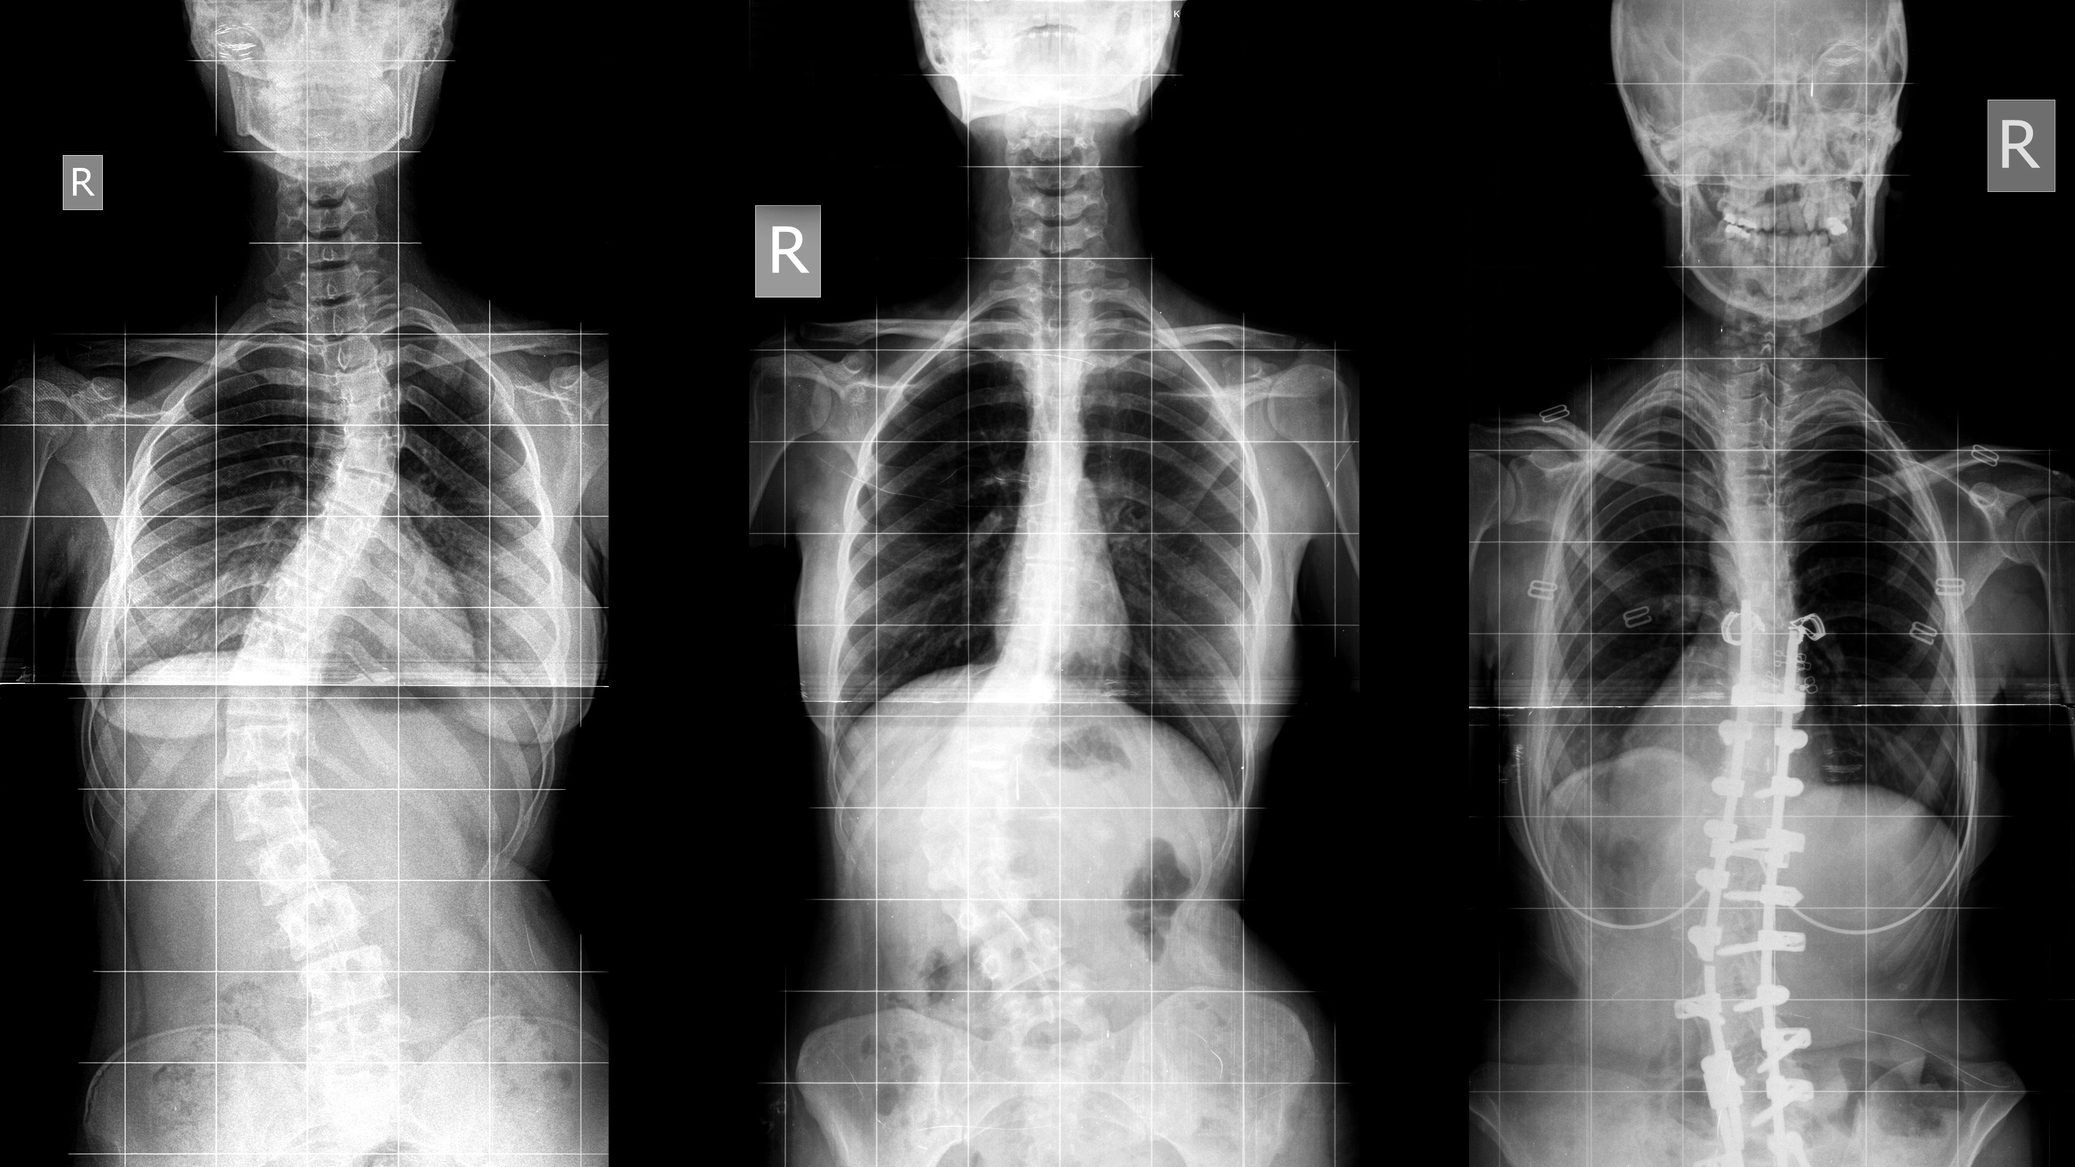 While most instances of scoliosis are mild, severe cases can cause the rib cage to press against the lungs, making it difficult to breathe. GETTY